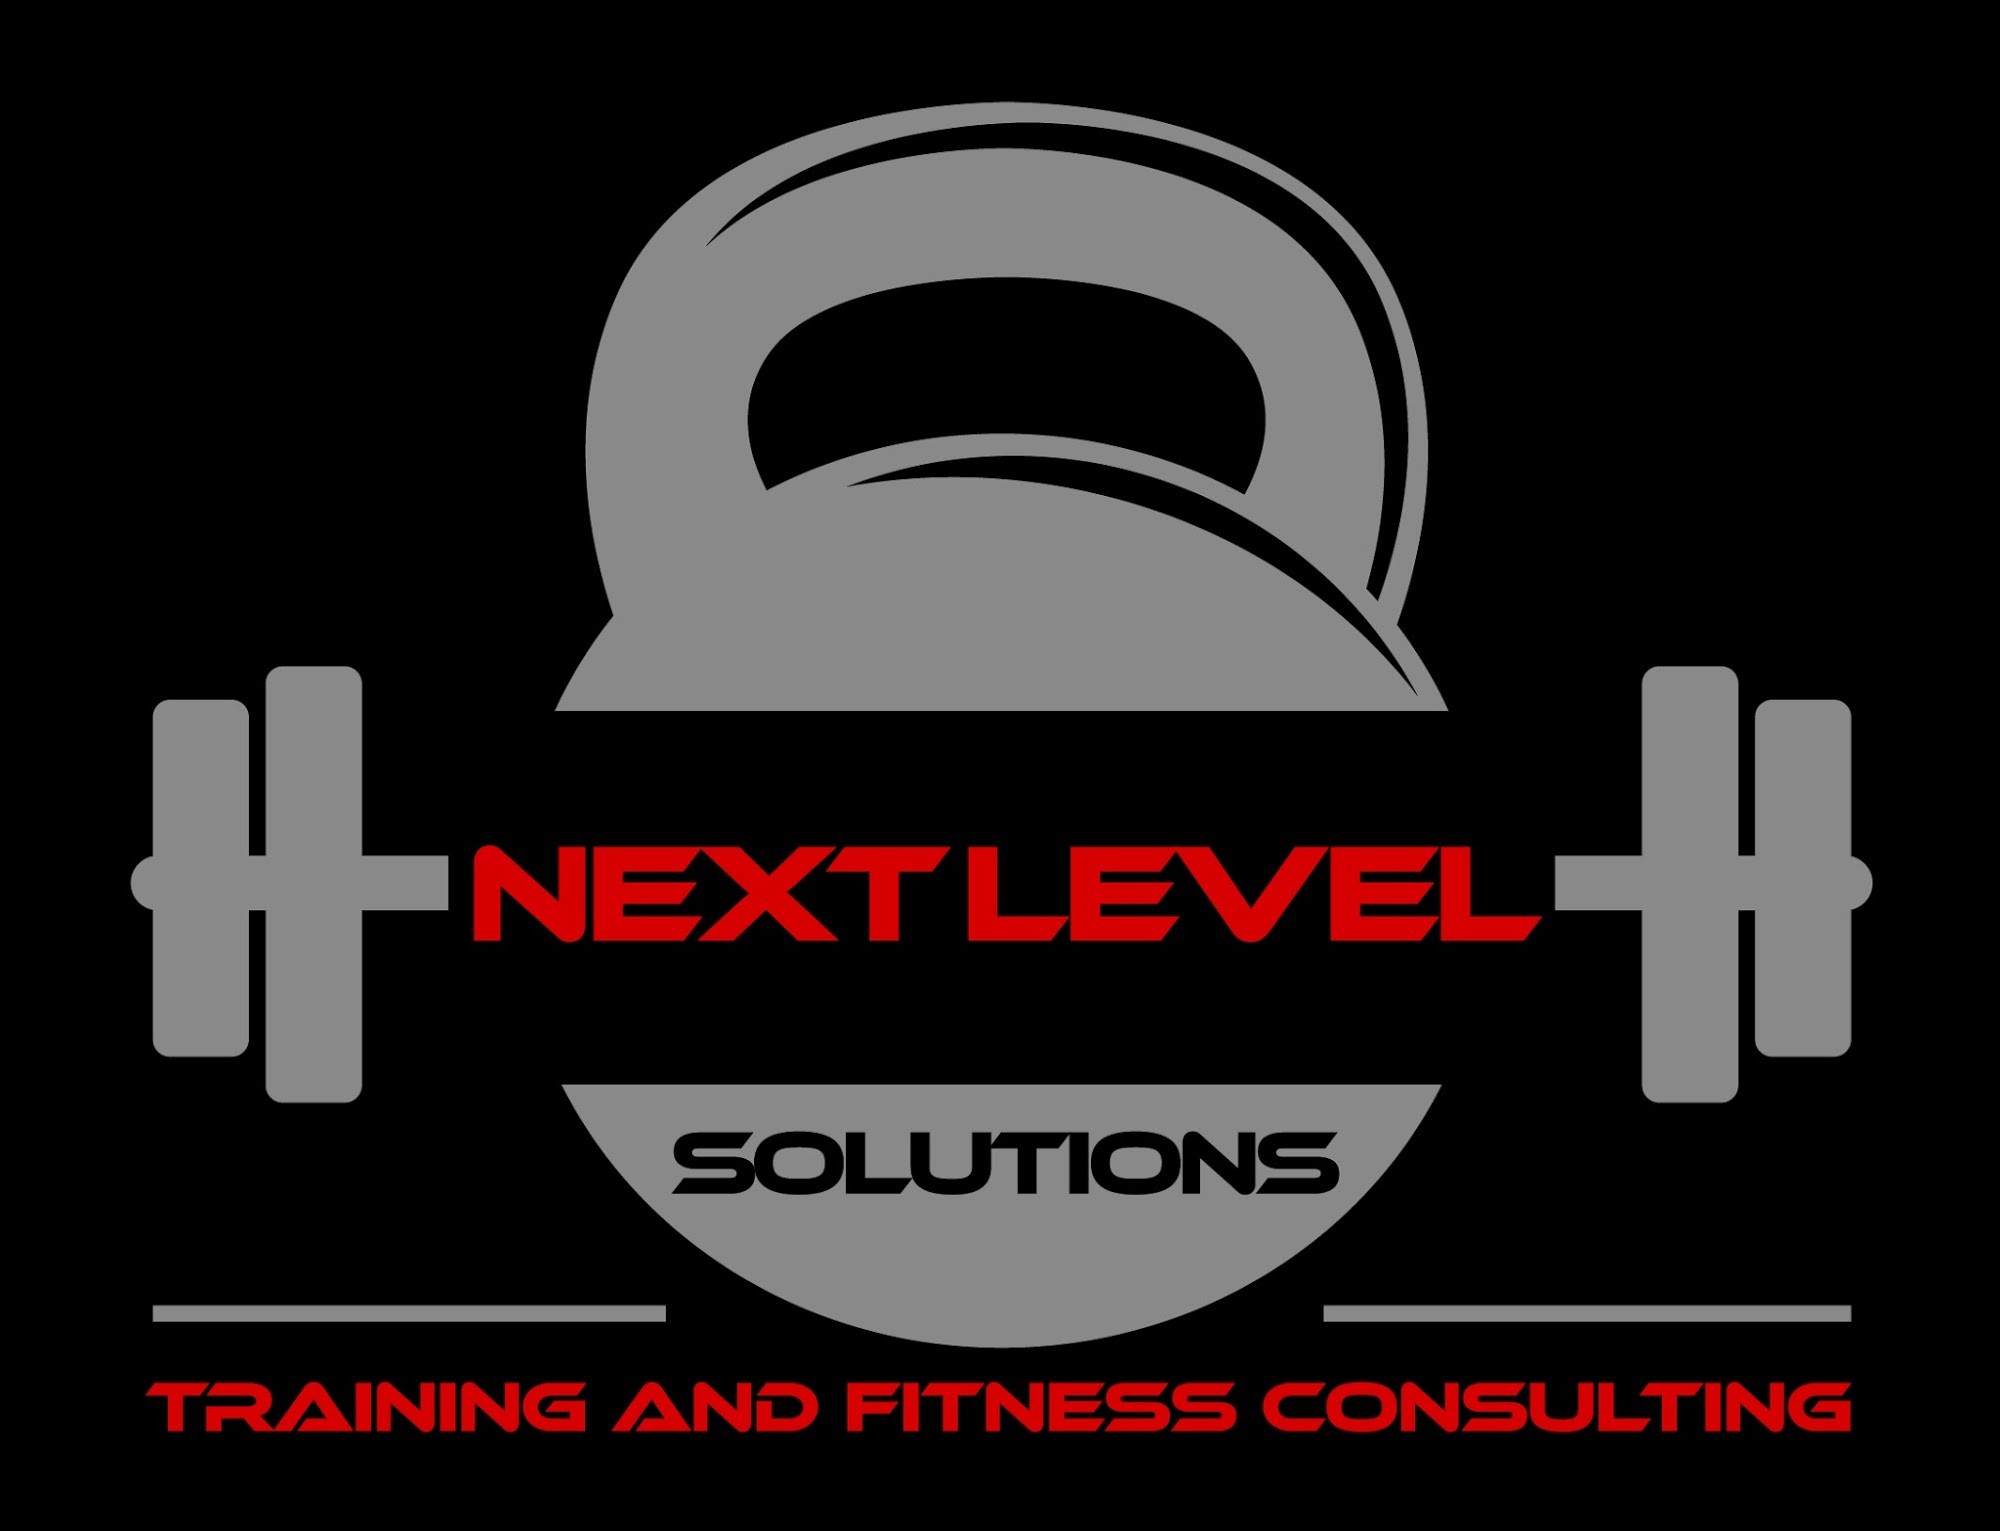 Next Level Solutions: Training and Fitness Consulting